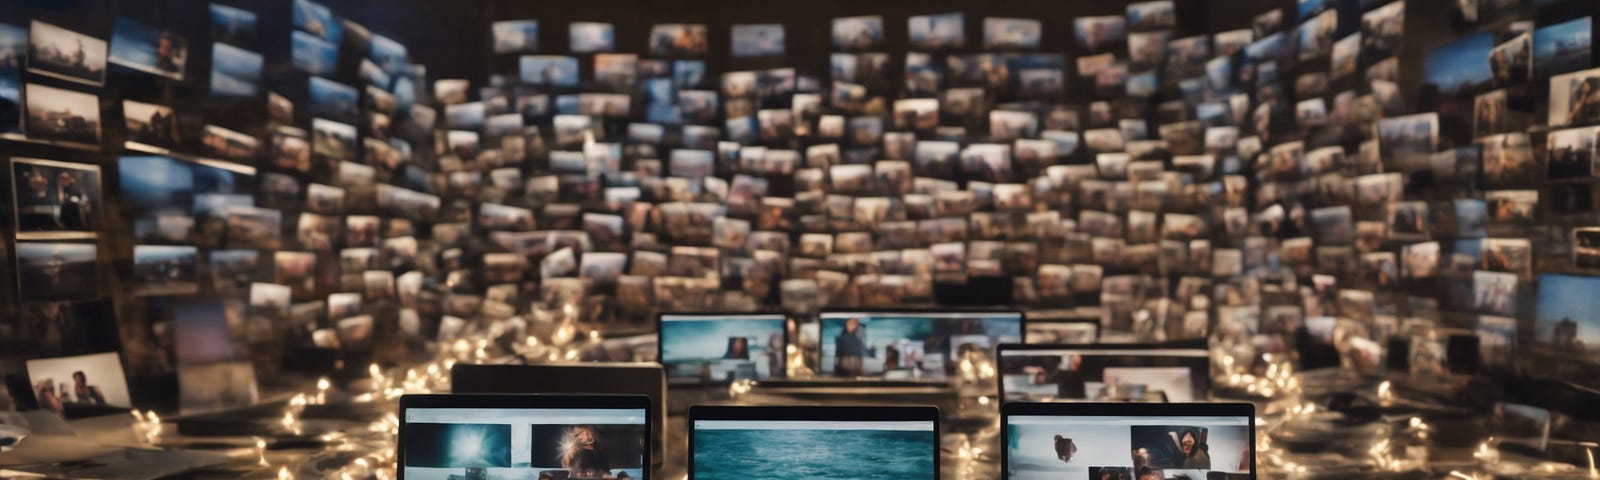 Laptops surrounded by walls of photos.